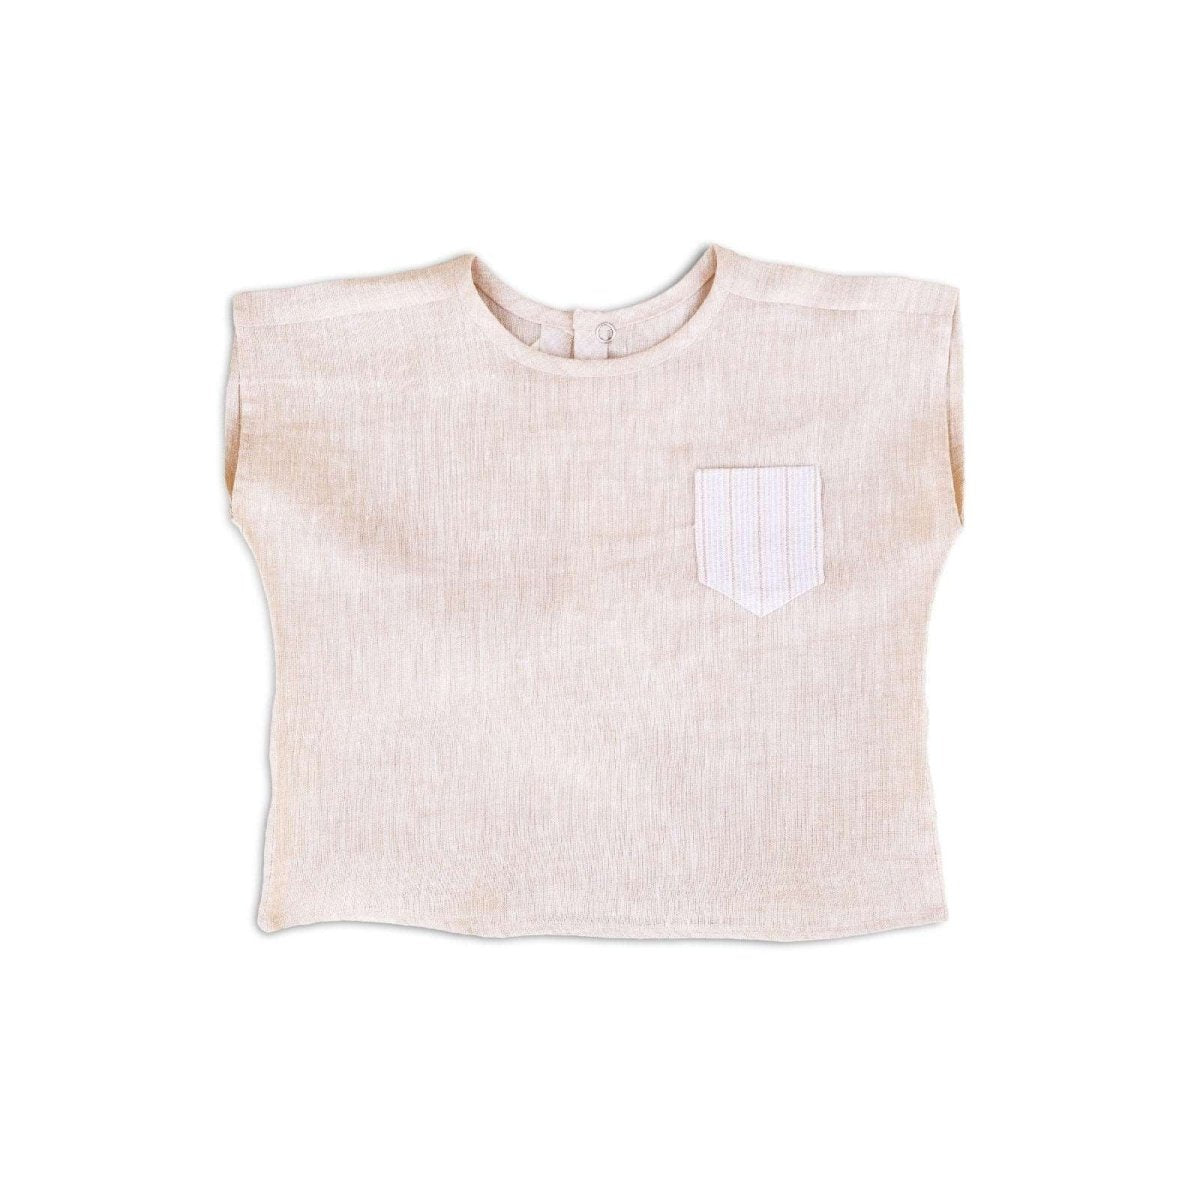 front view of Beya Made pale pink linen top shown flat on white background